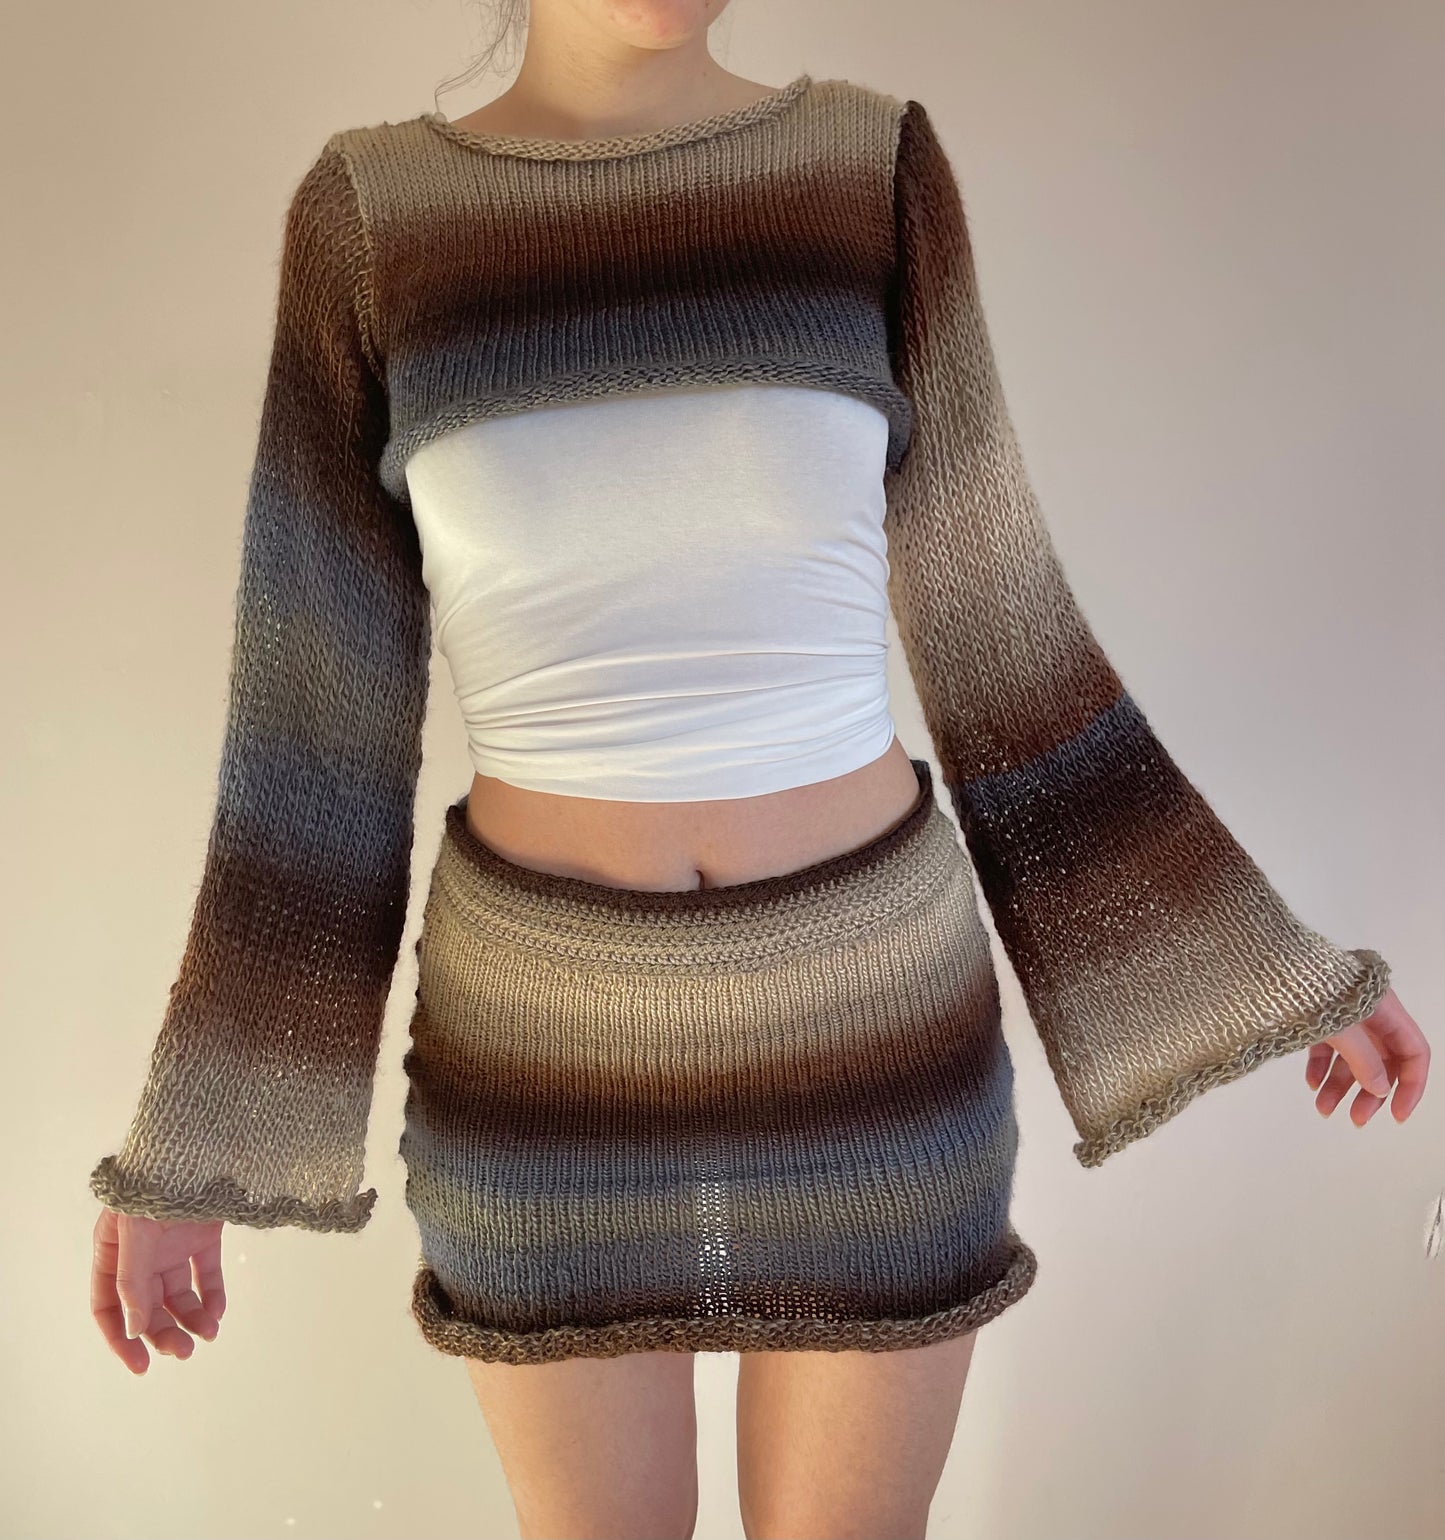 Handmade knitted ombré cropped jumper - Seashell colourway